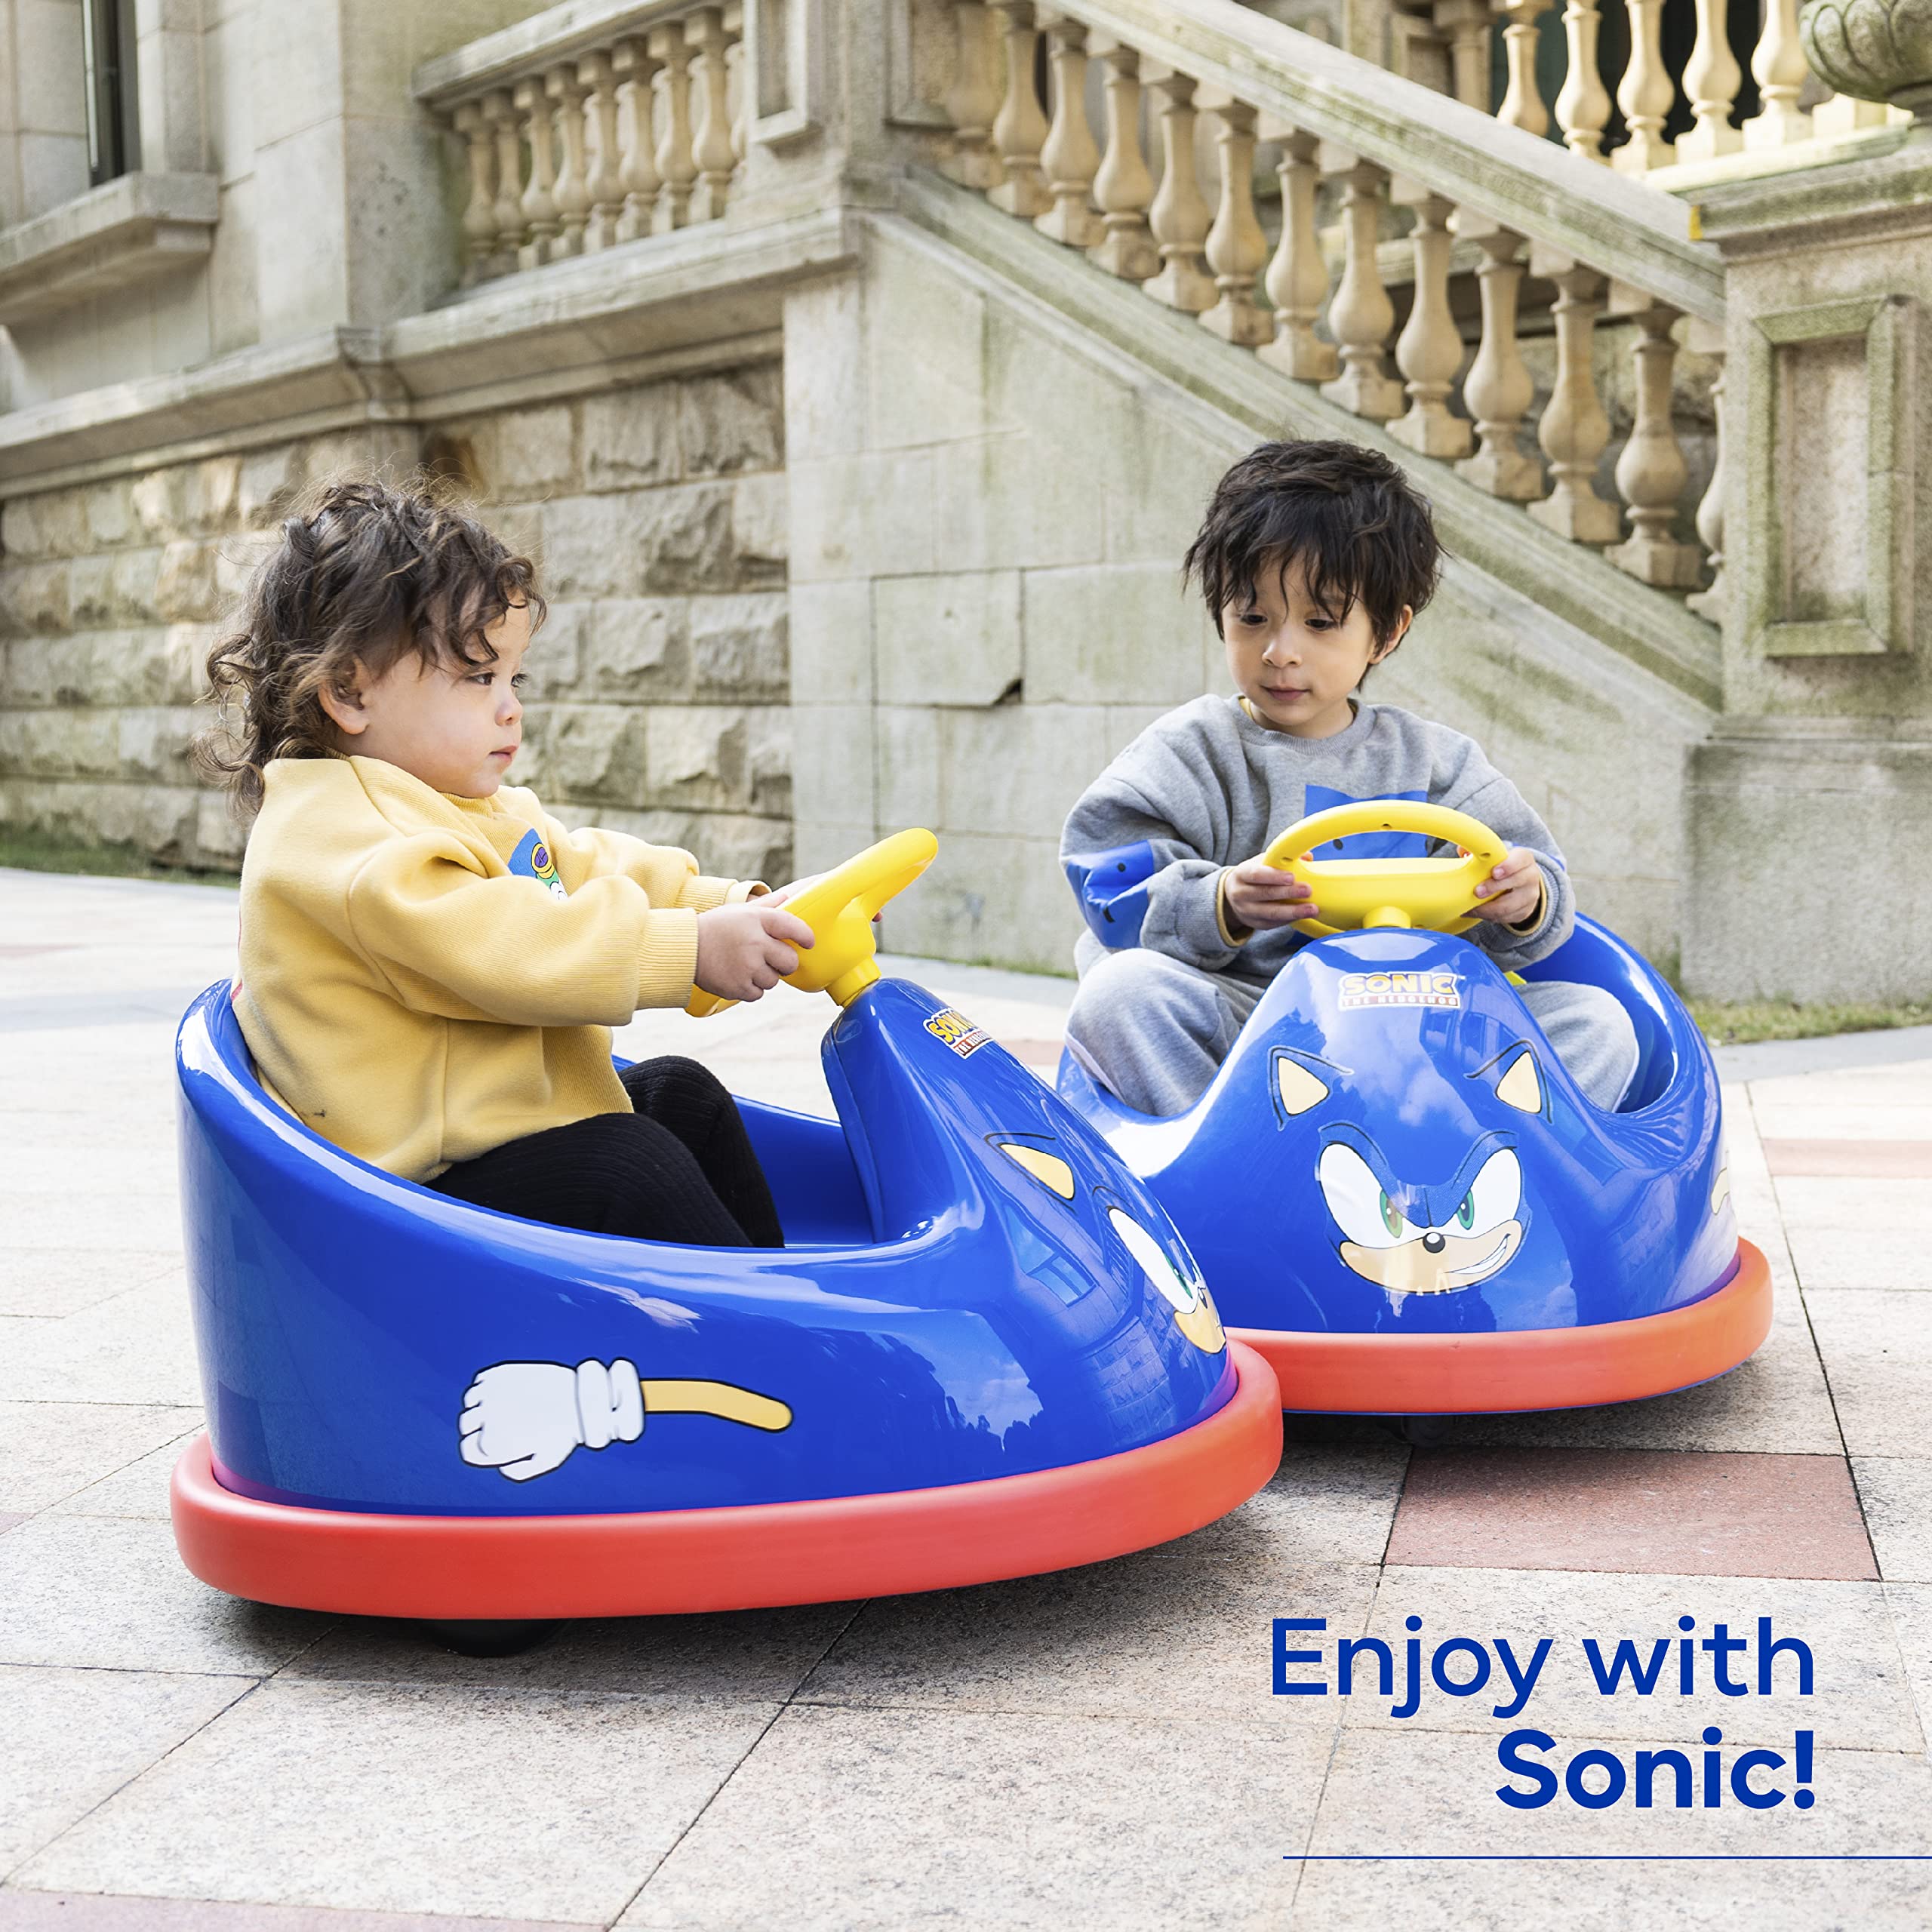 Sakar Sonic The Hedgehog Bumper Car for Kids, 2 Speed Electric Vehicle, Toddler Bumper Car with Remote Control and 360 Degree Turning, 12V 20W Motor, LED Lights, Gifts for Toddlers, Large